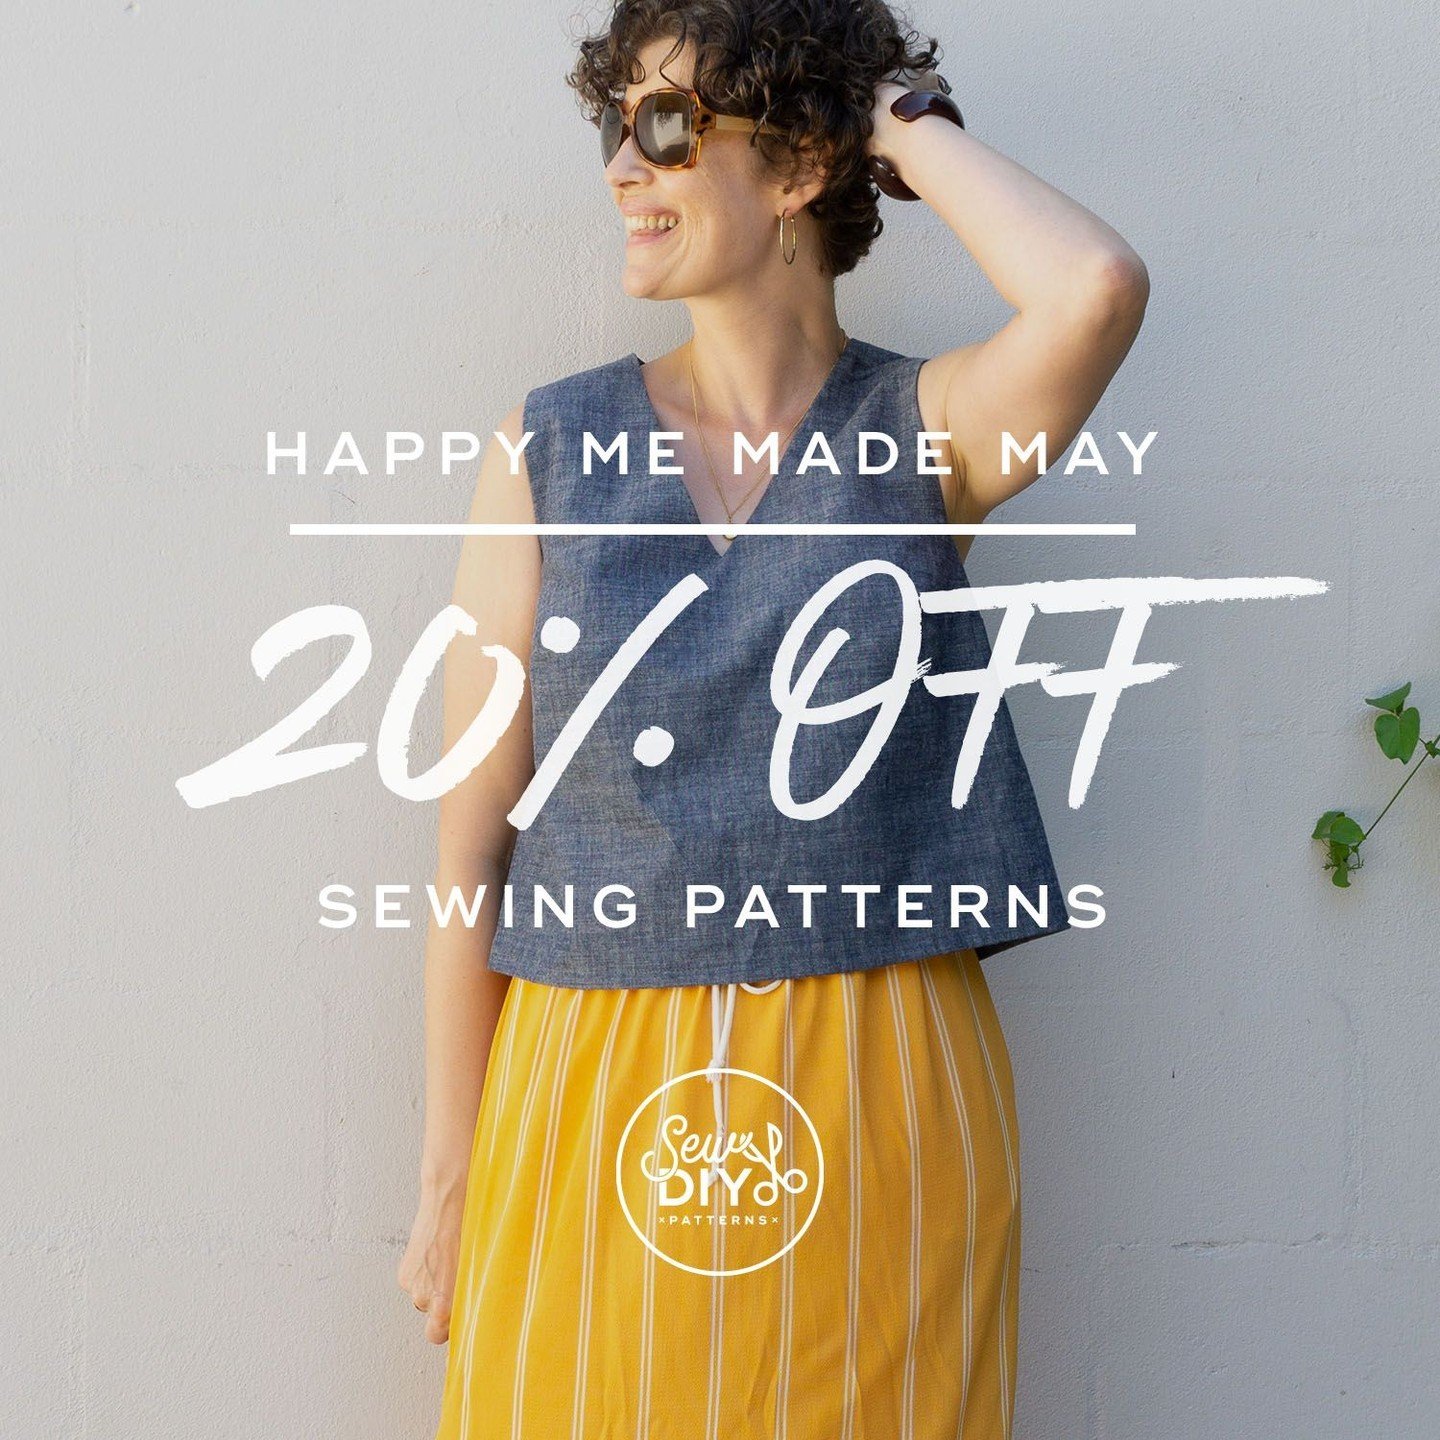 Happy Me Made May sew-friends! ✨🧵 ✨ This is always one of my favorite months of the year, getting to just celebrate how fantastic it is to sew our own clothes. First off, I want to send a big thank you to Zoe @sozoblog for hosting this community eve